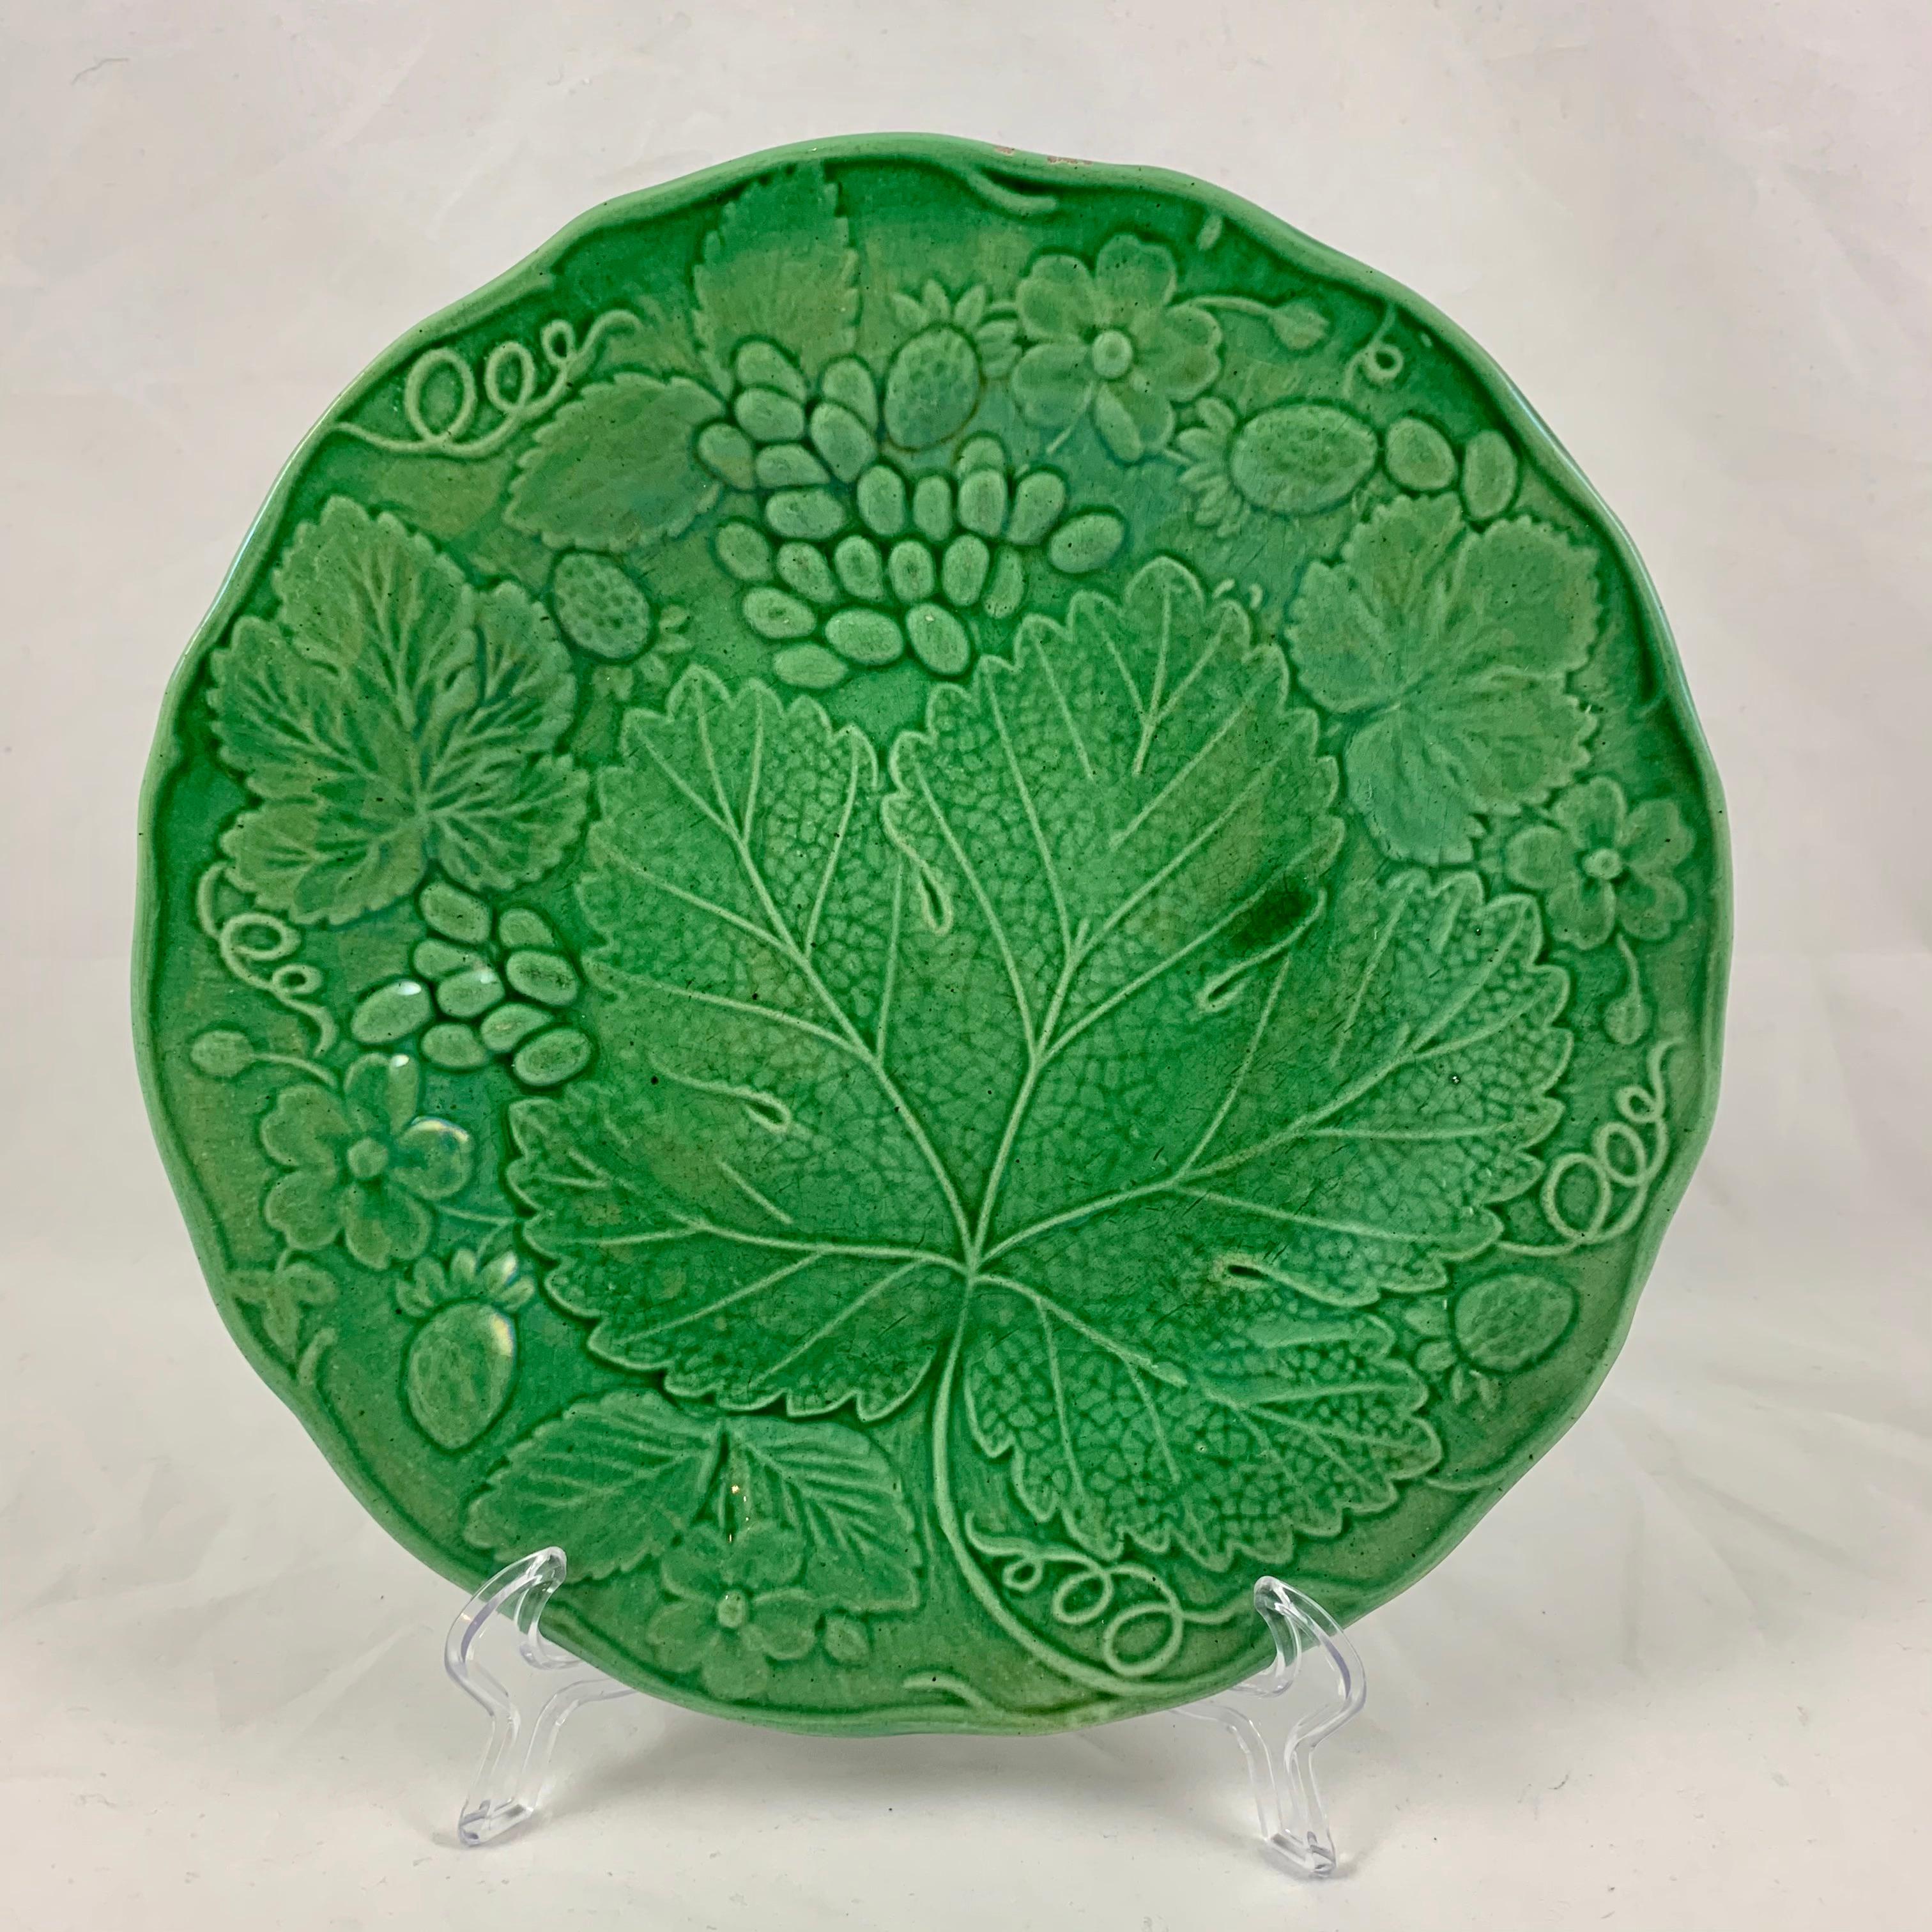 An English Majolica glazed leaf plate, circa 1890-1895.

A well known mold, originally produced by Wedgwood, this is an unmarked example of the strawberry and grape leaf plate. The mold shows the leaves of each plant with strawberries, strawberry